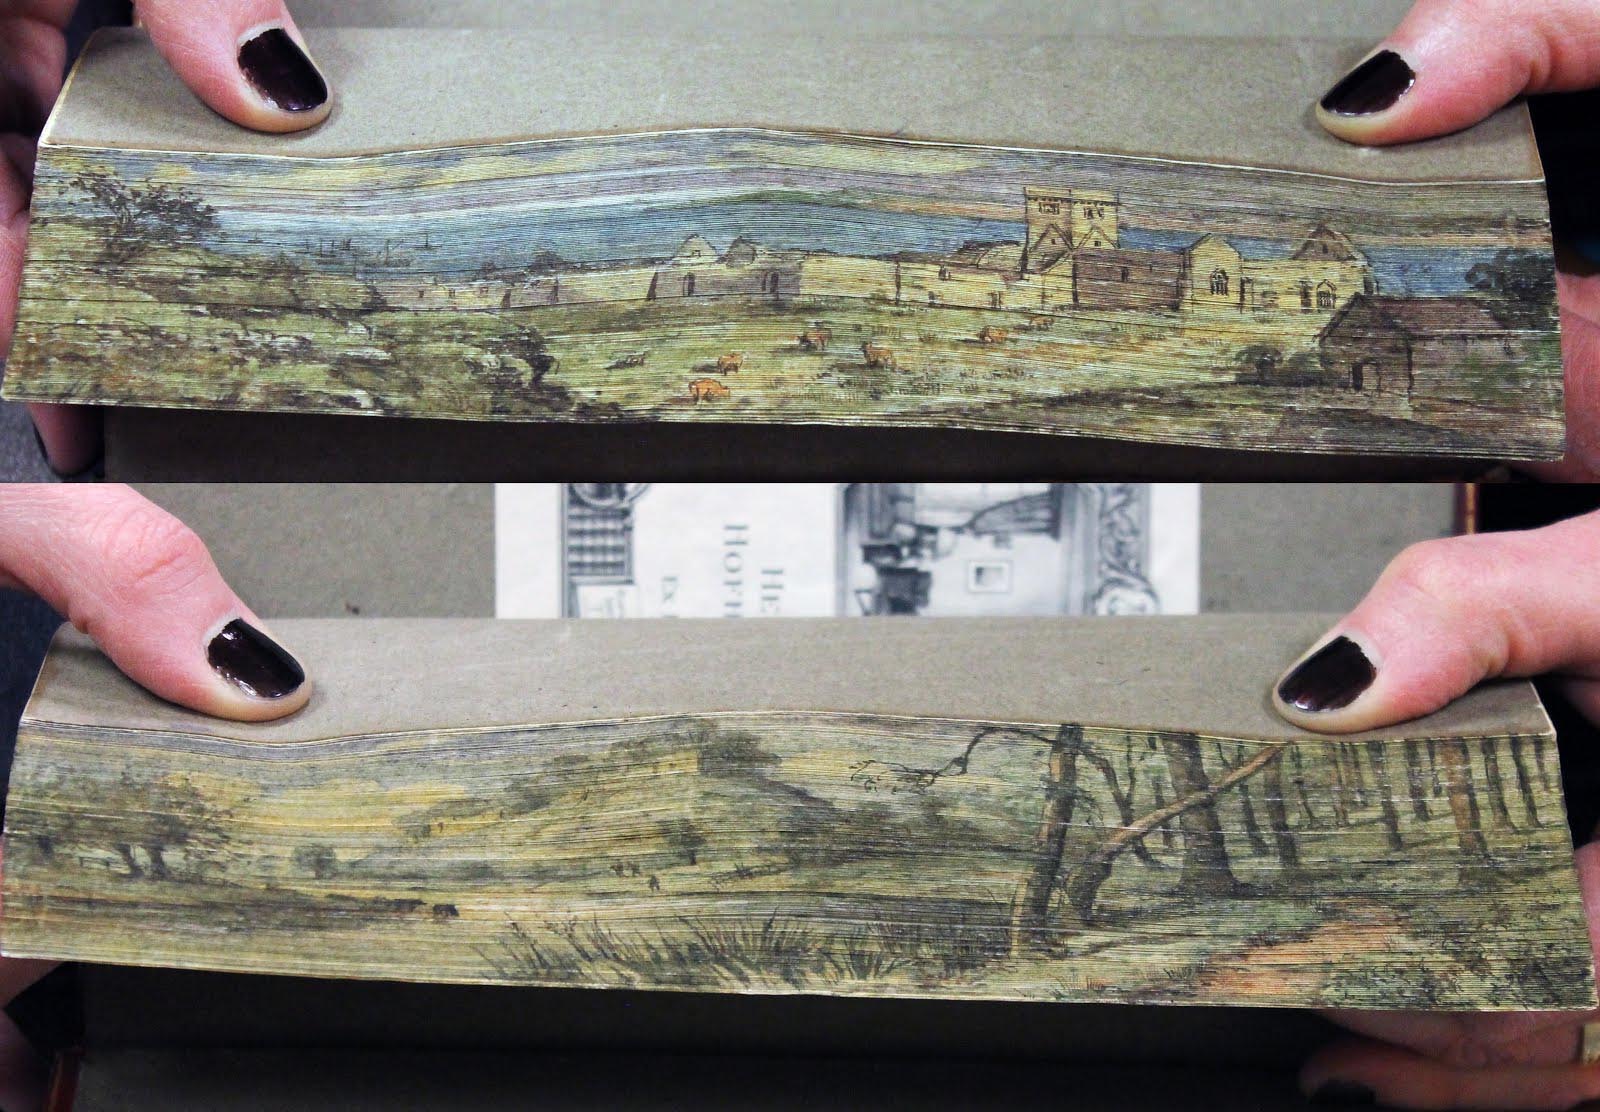 Two examples of fore-edge paintings: top painting is of a pasture with animals grazing near neutral colored buildings; bottom painting is of a trail in the woods with a hill and some people in the distance